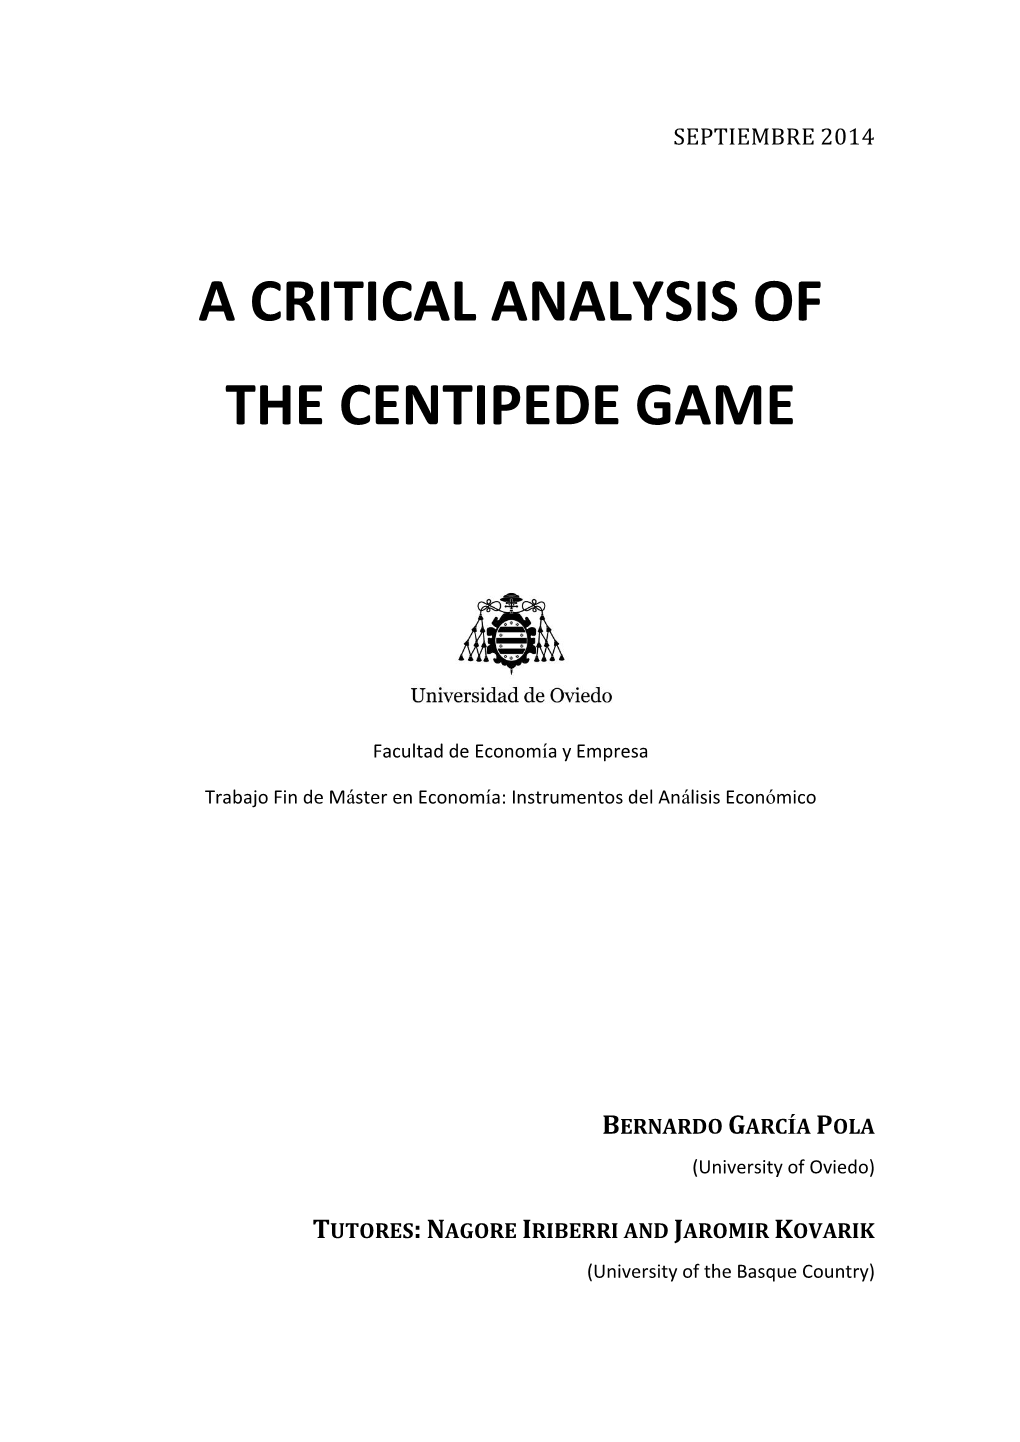 A Critical Analysis of the Centipede Game